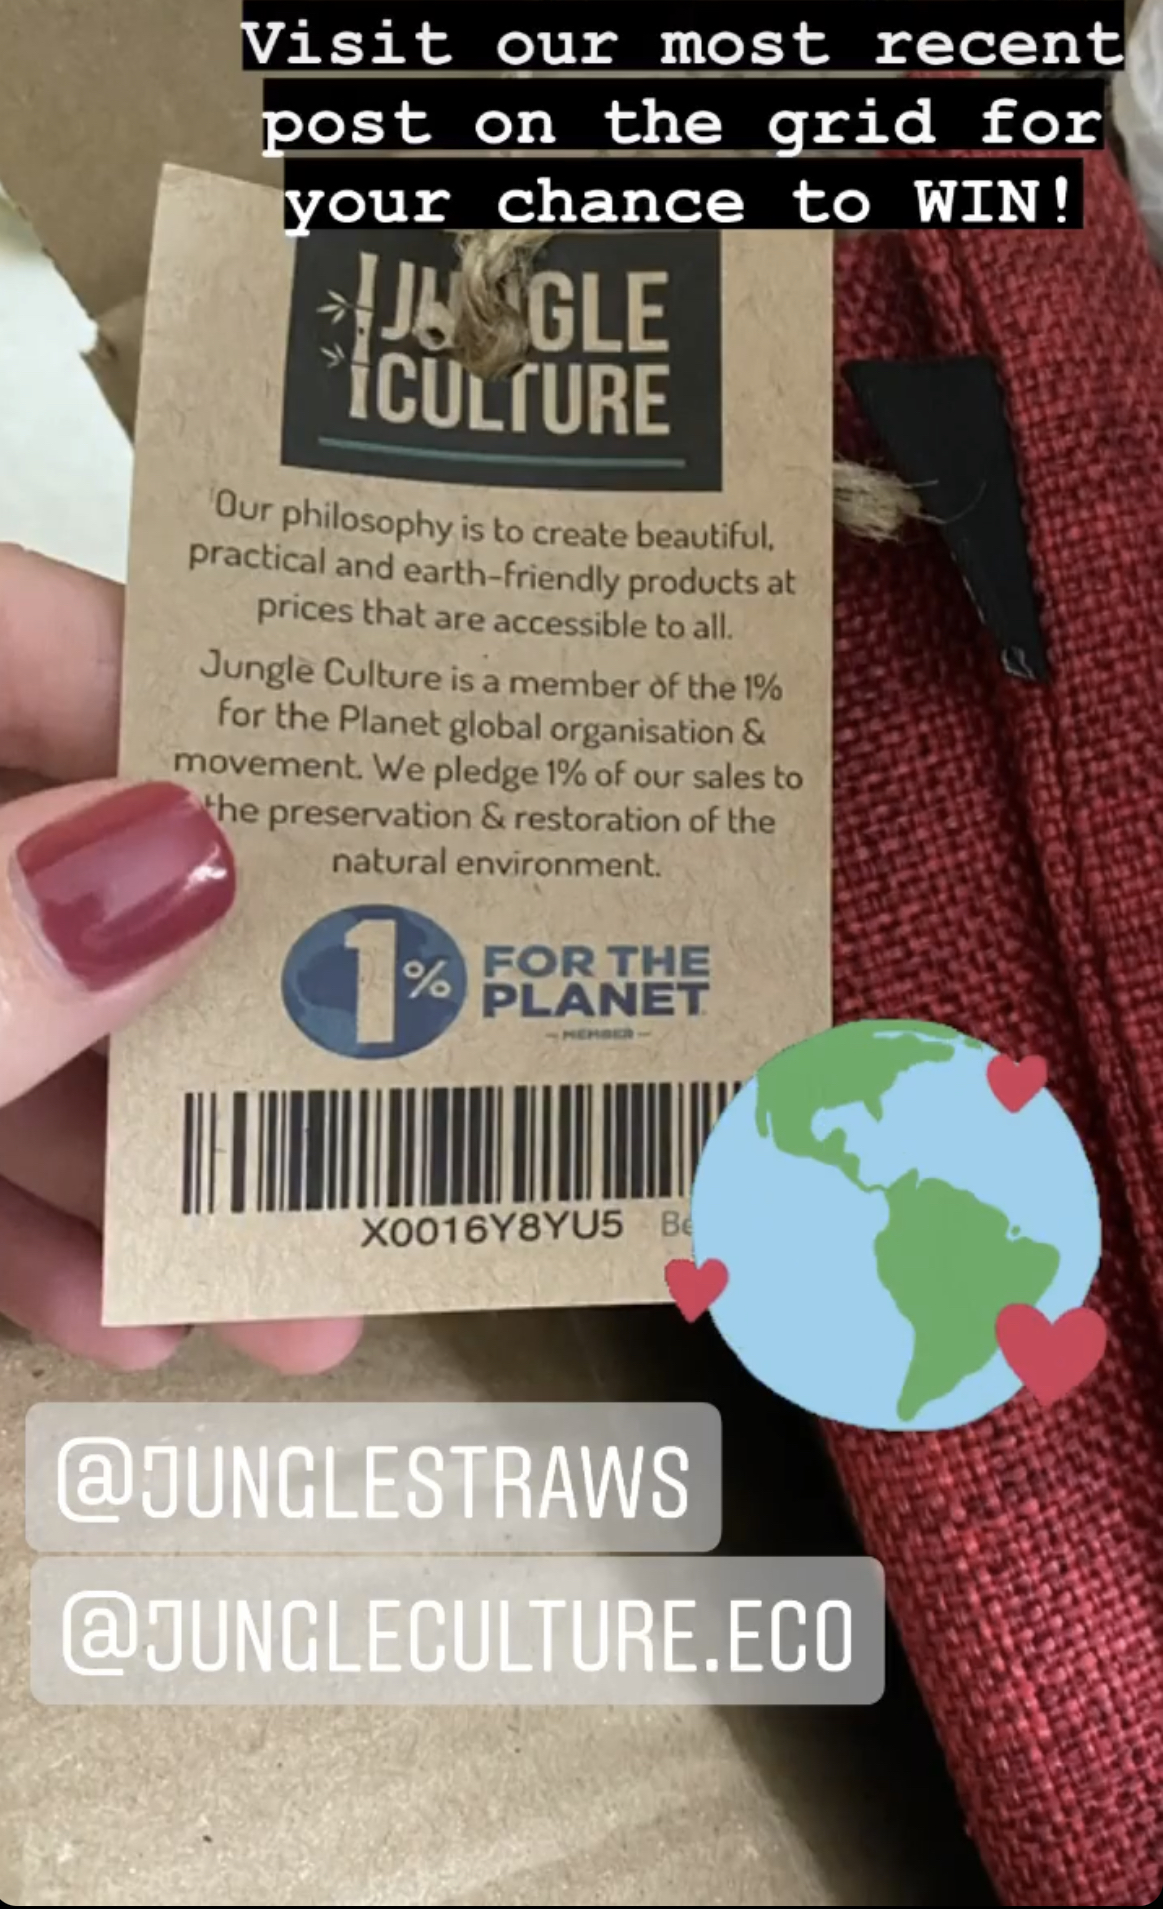 A tag explaining how good the products are for the planet